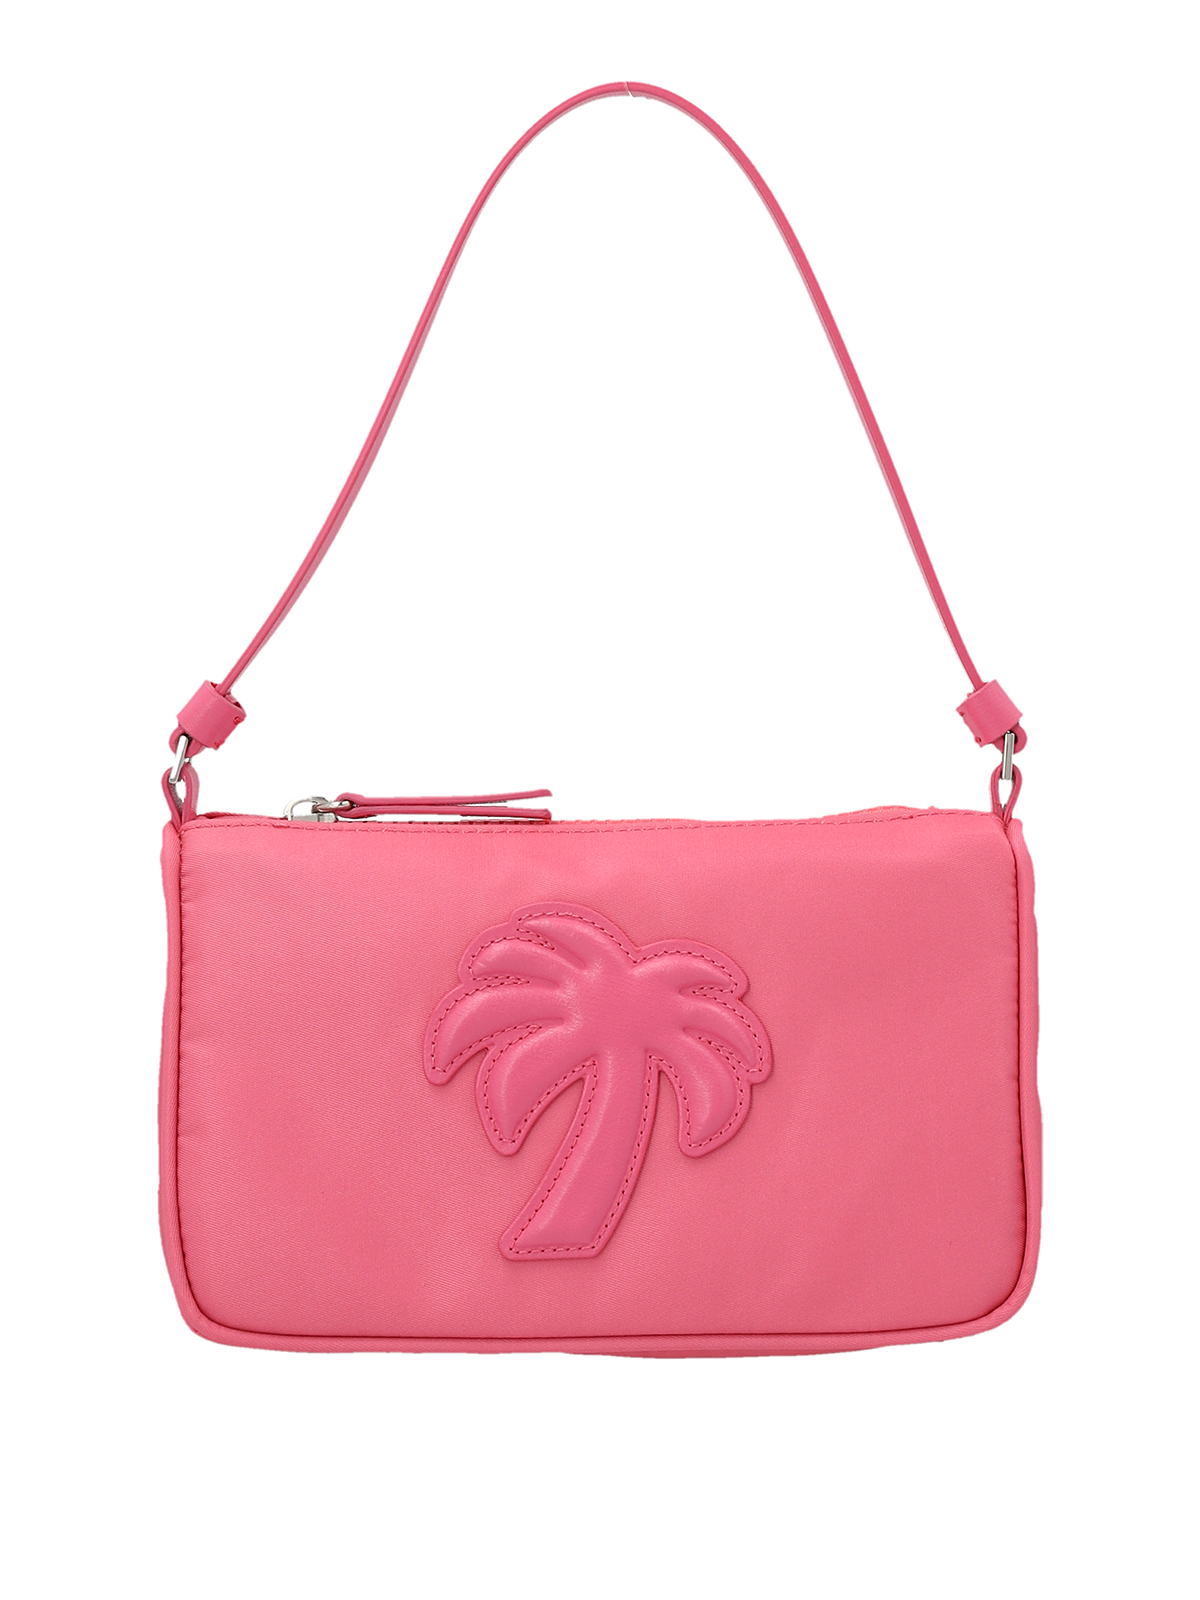 Palm Angels Big Palm Cross Body Bag In Pink